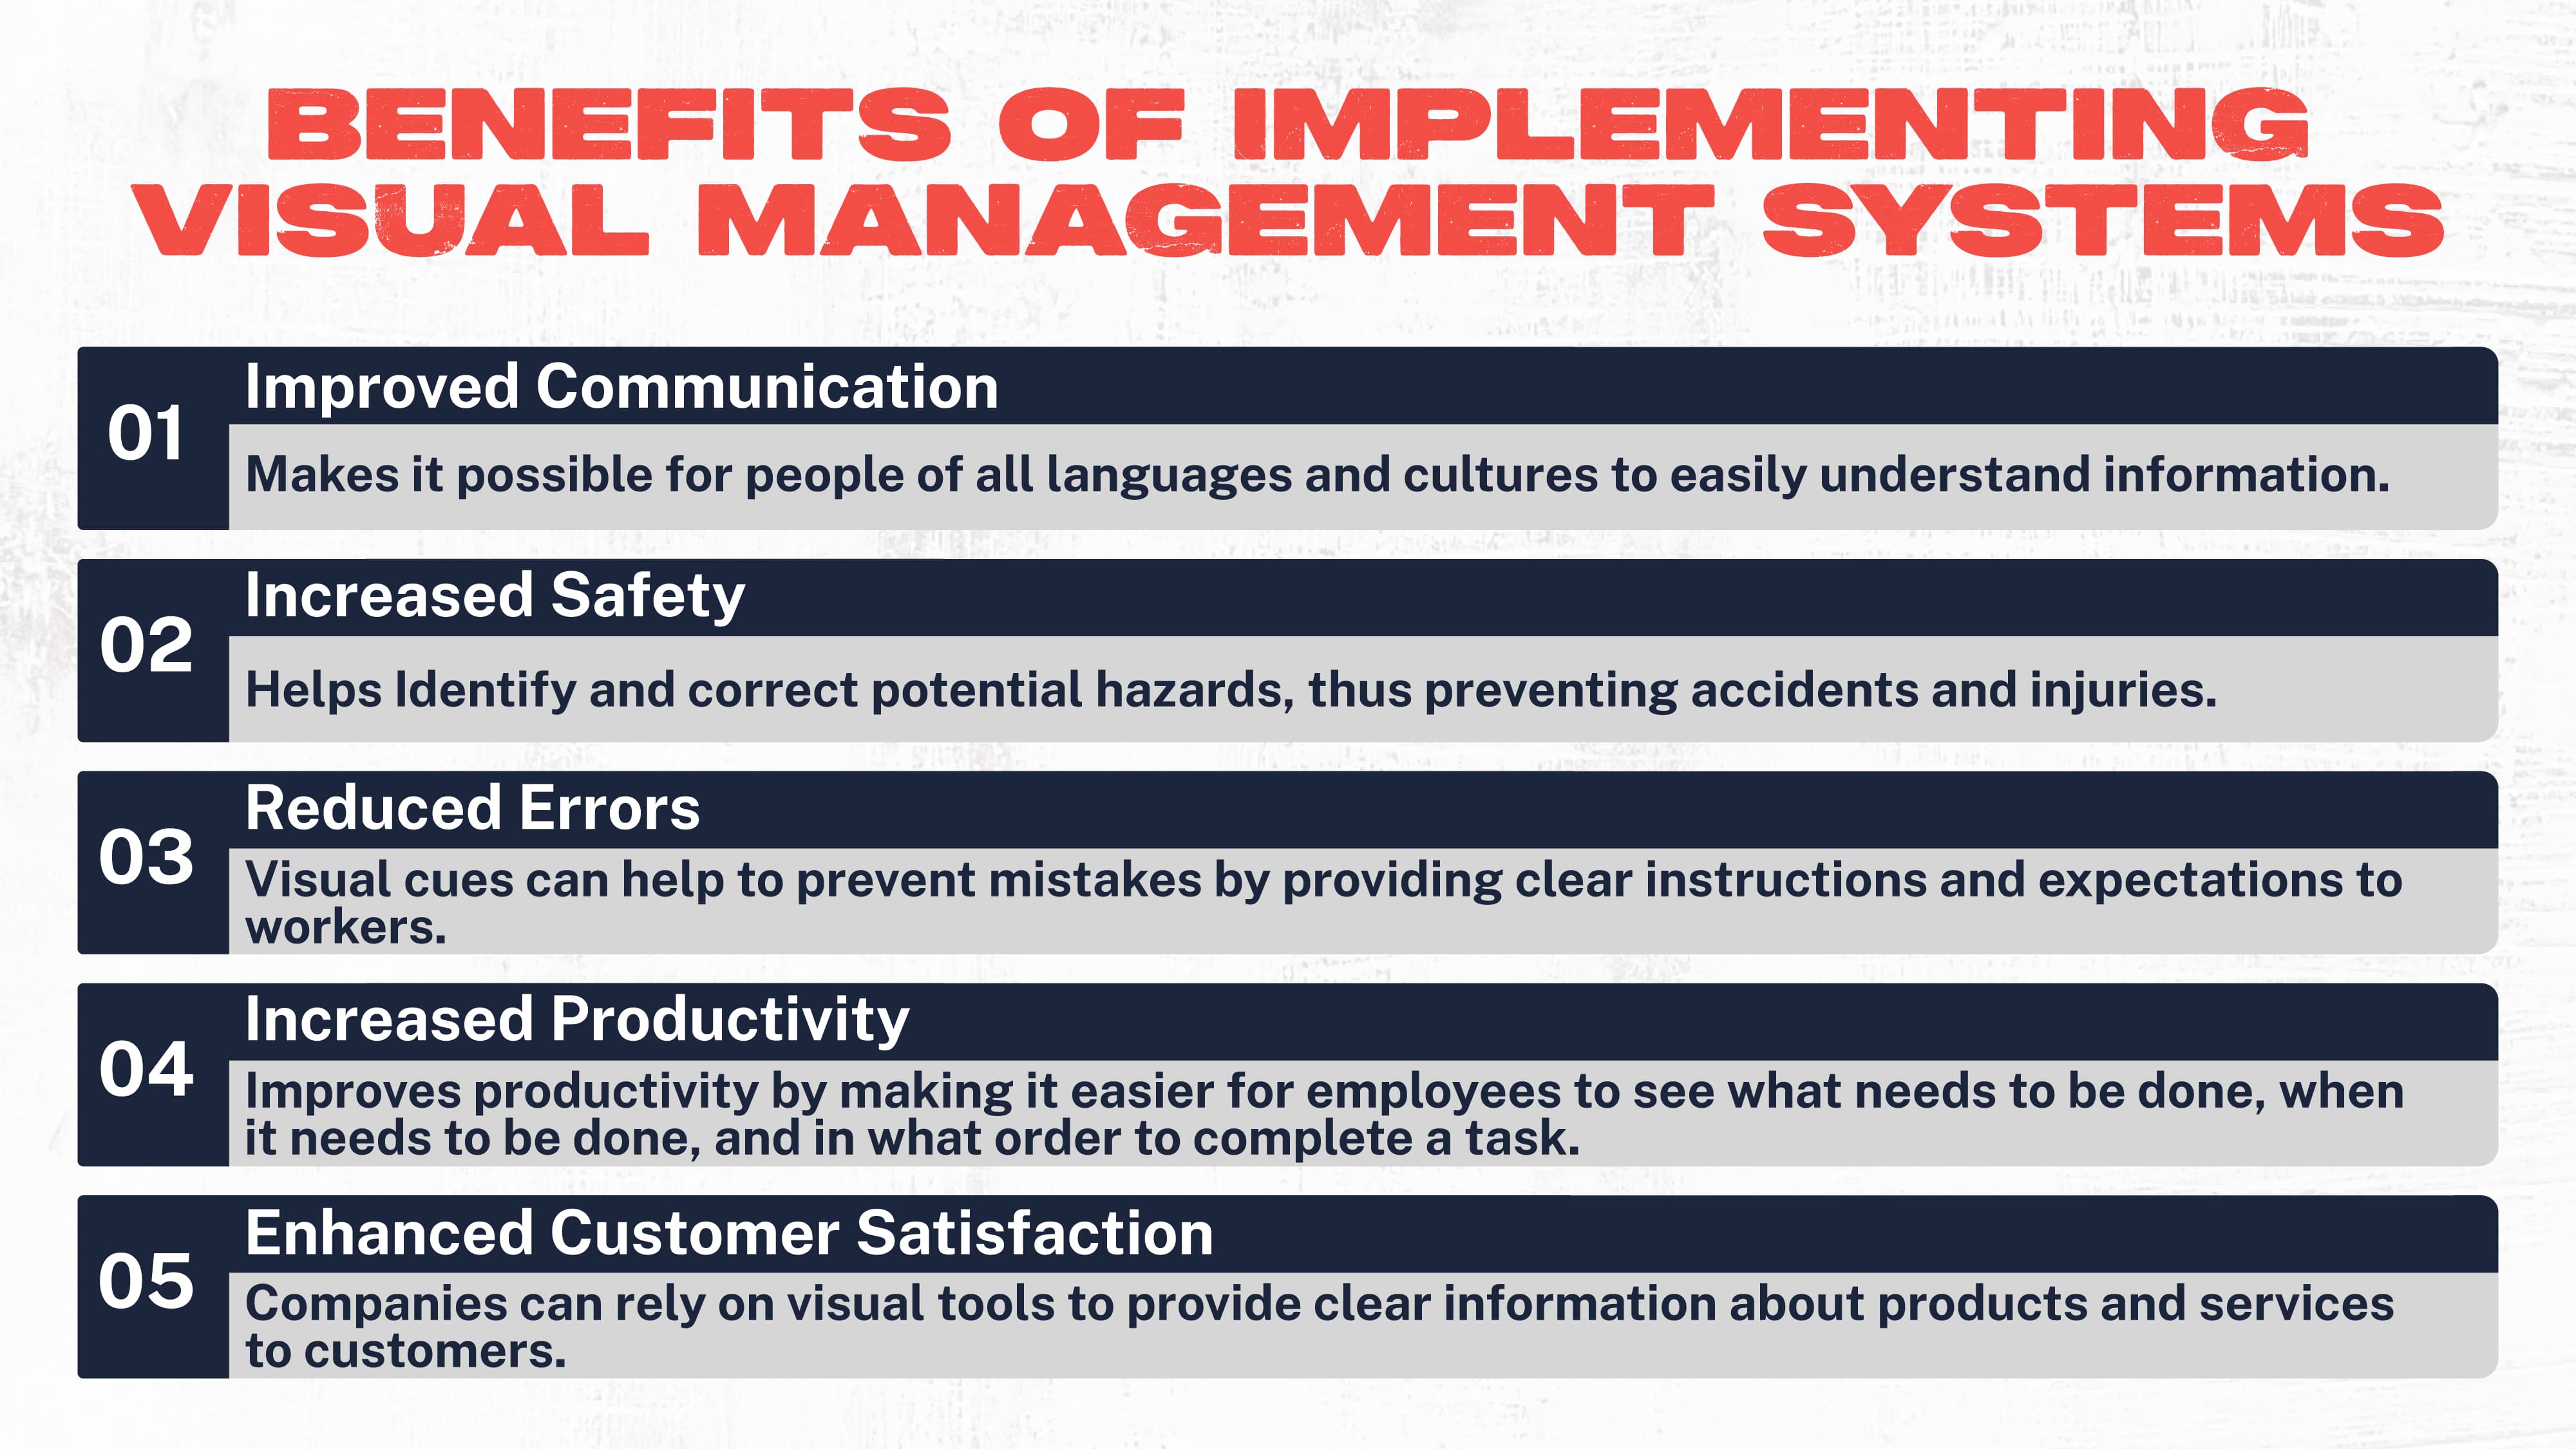 BENEFITS OF IMPLEMENTING VISUAL MANAGEMENT SYSTEMS